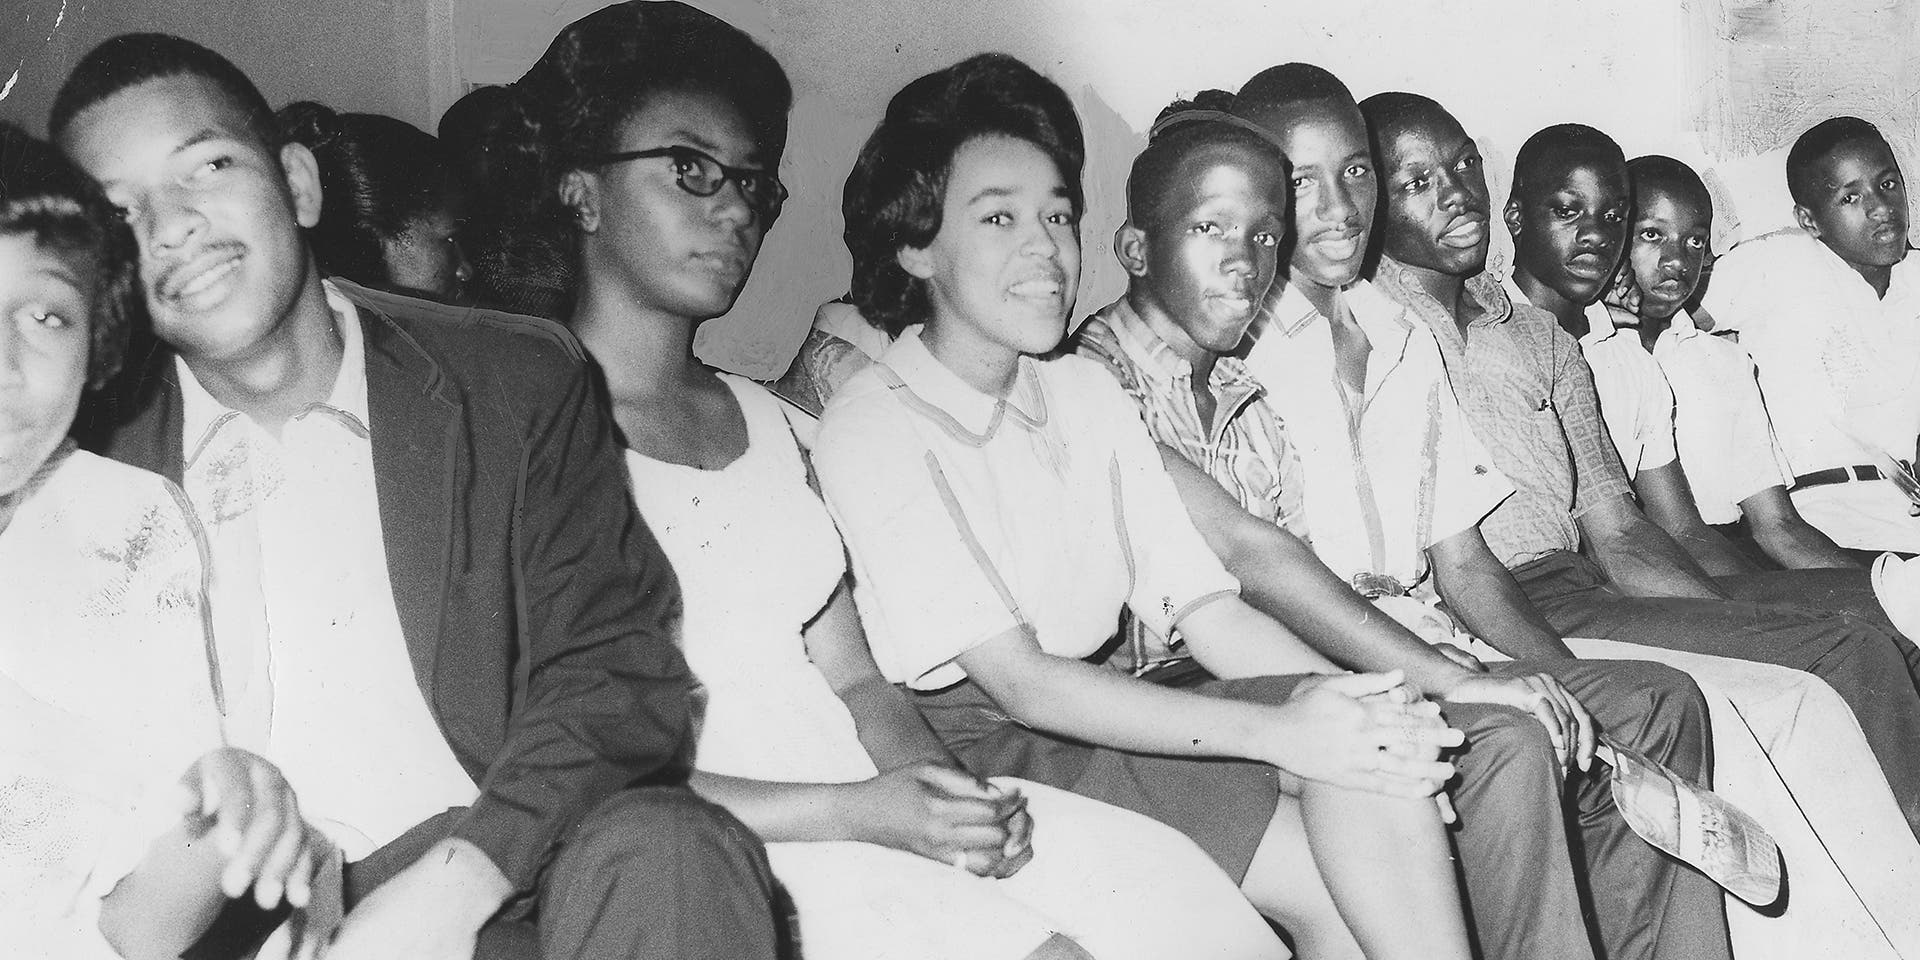 Members of the Student Nonviolent Coordinating Committee (SNCC) , 1964. (Photo by Afro American Newspapers/Gado/Getty Images)